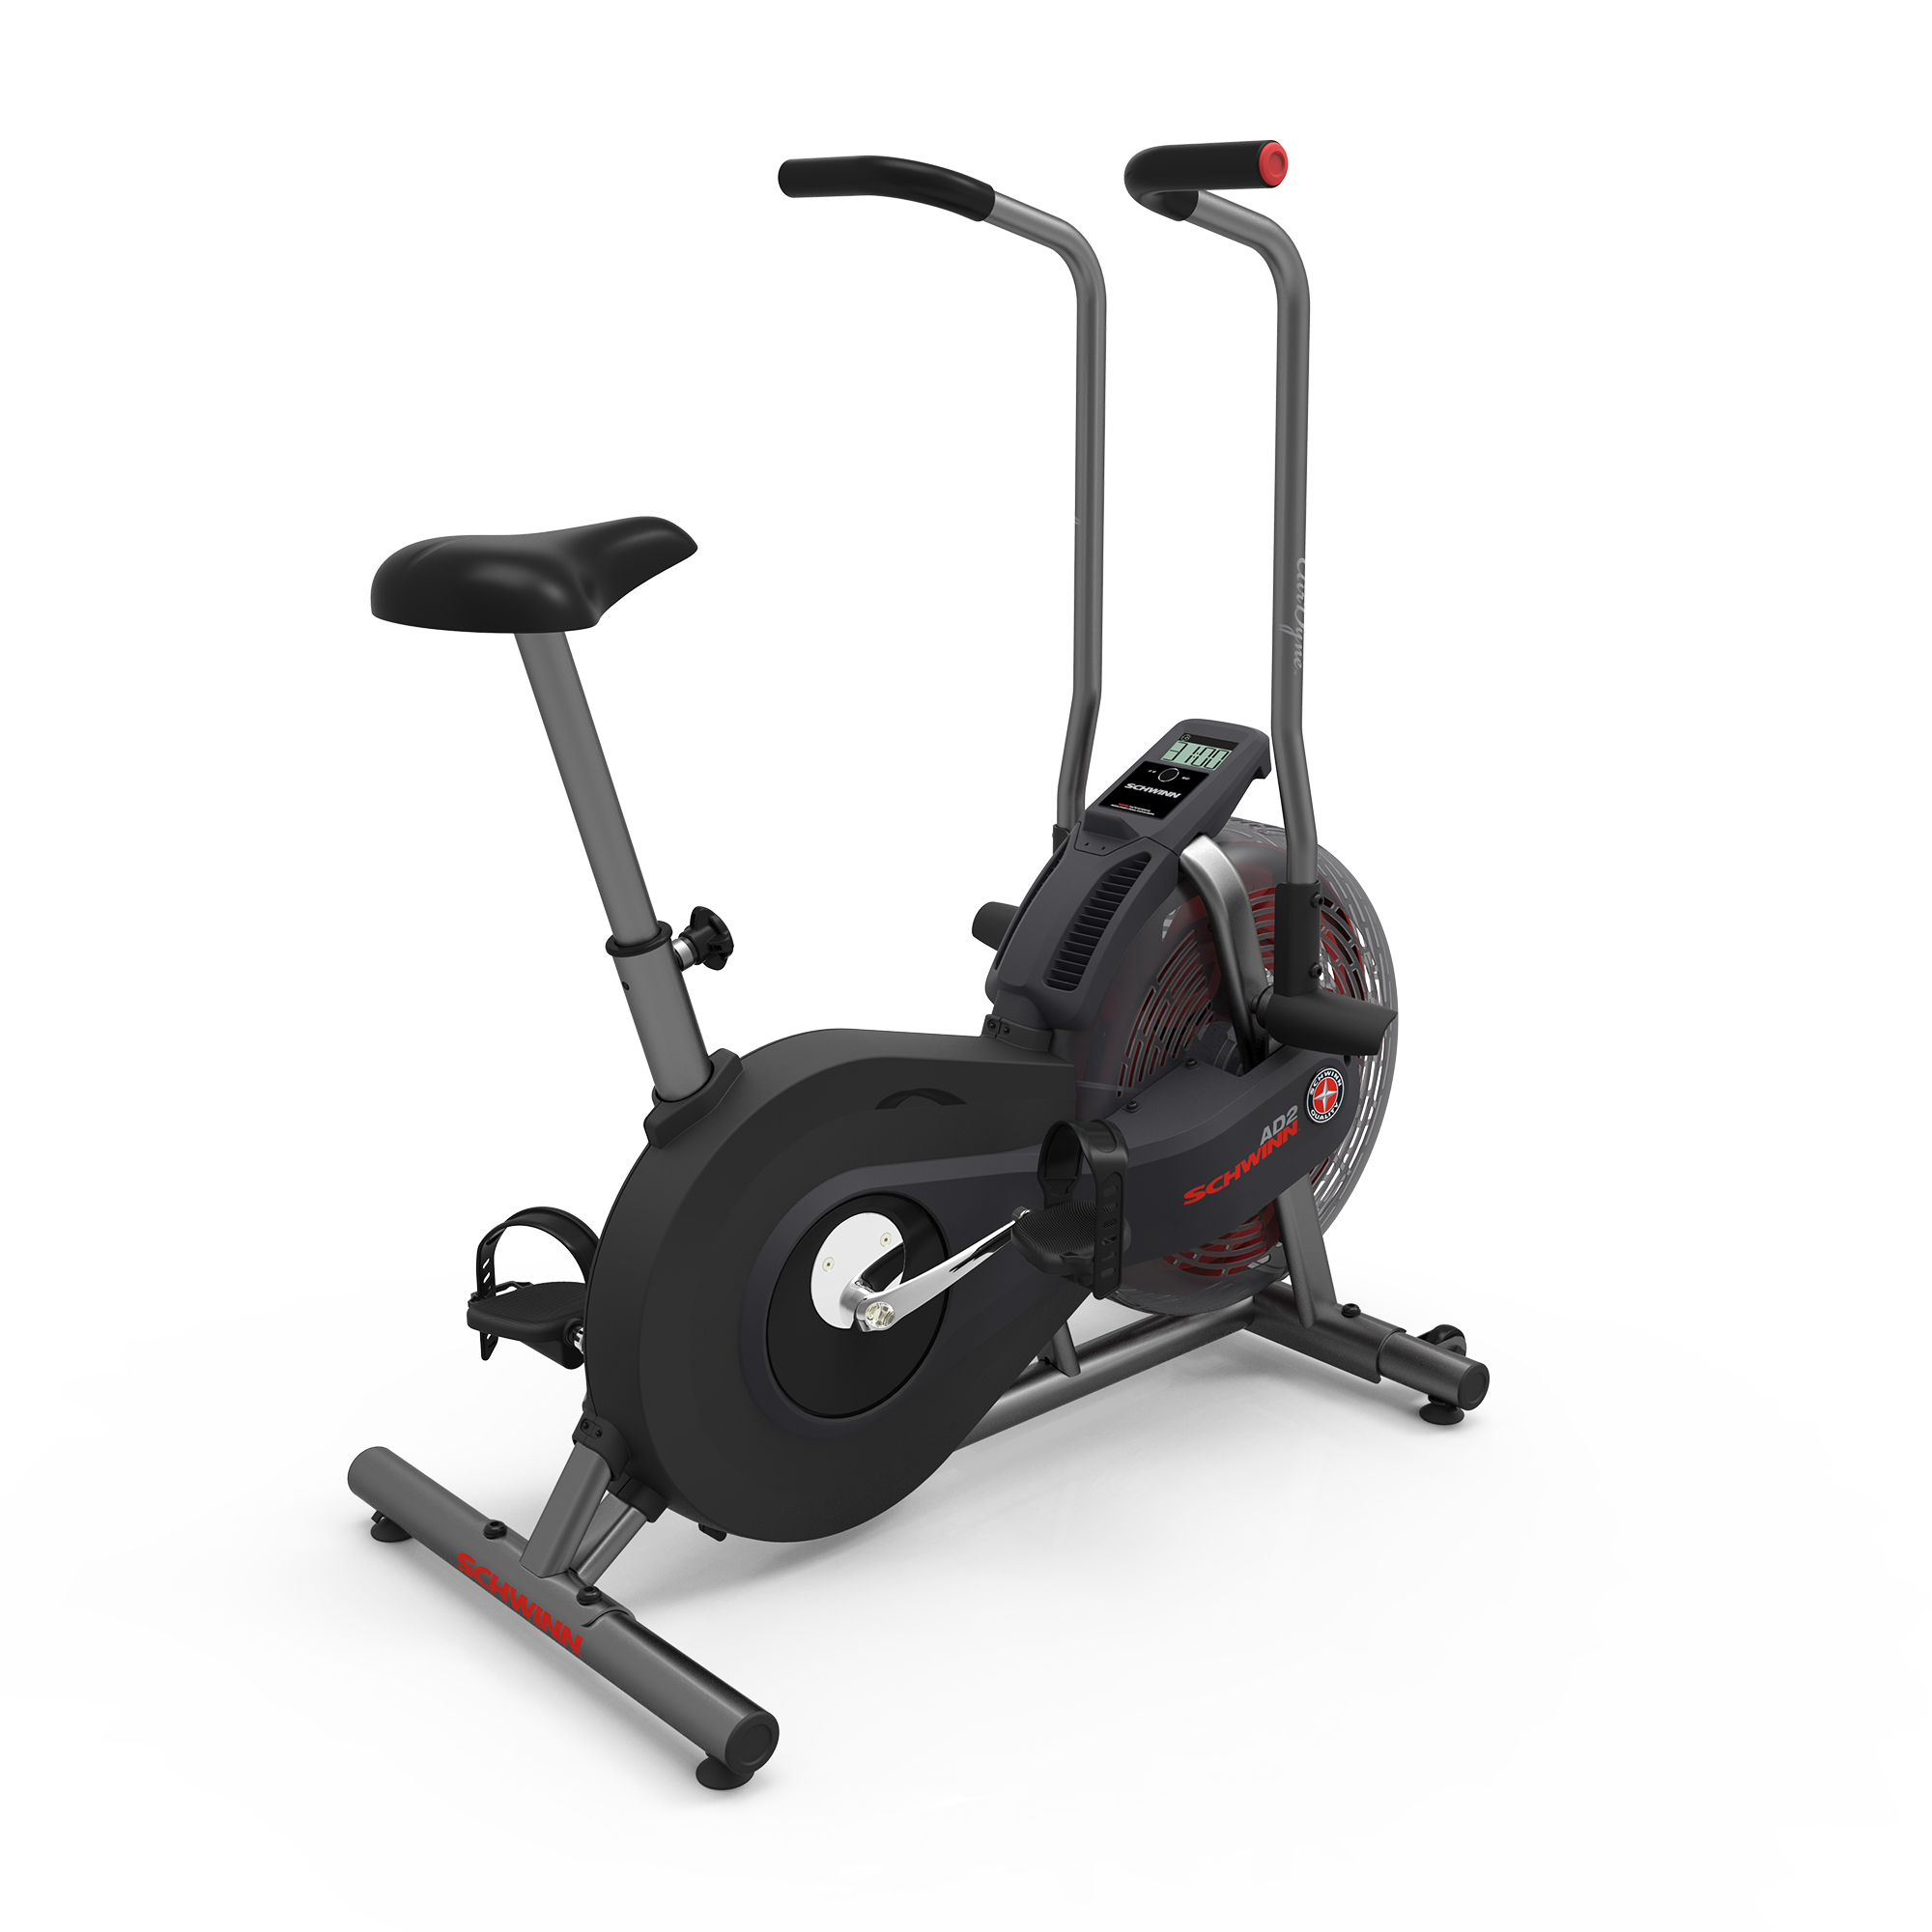 Airdyne AD2 Bike - Our Most Affordable 